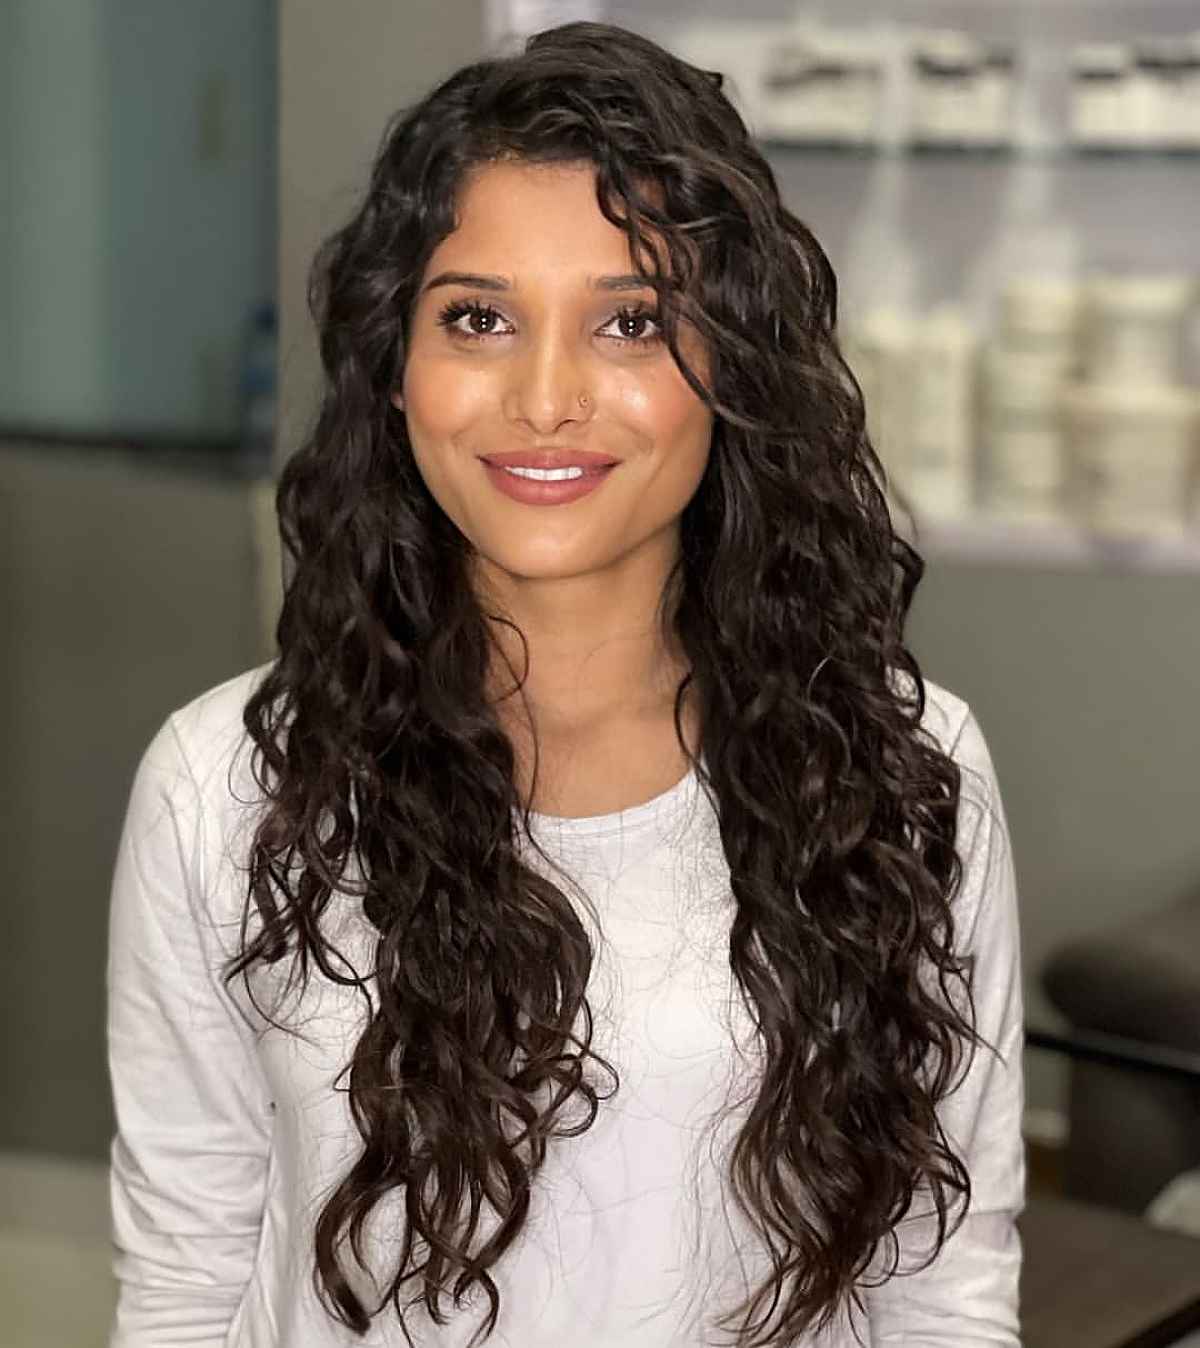 24 Best Haircut Ideas for Long & Layered Curly Hair